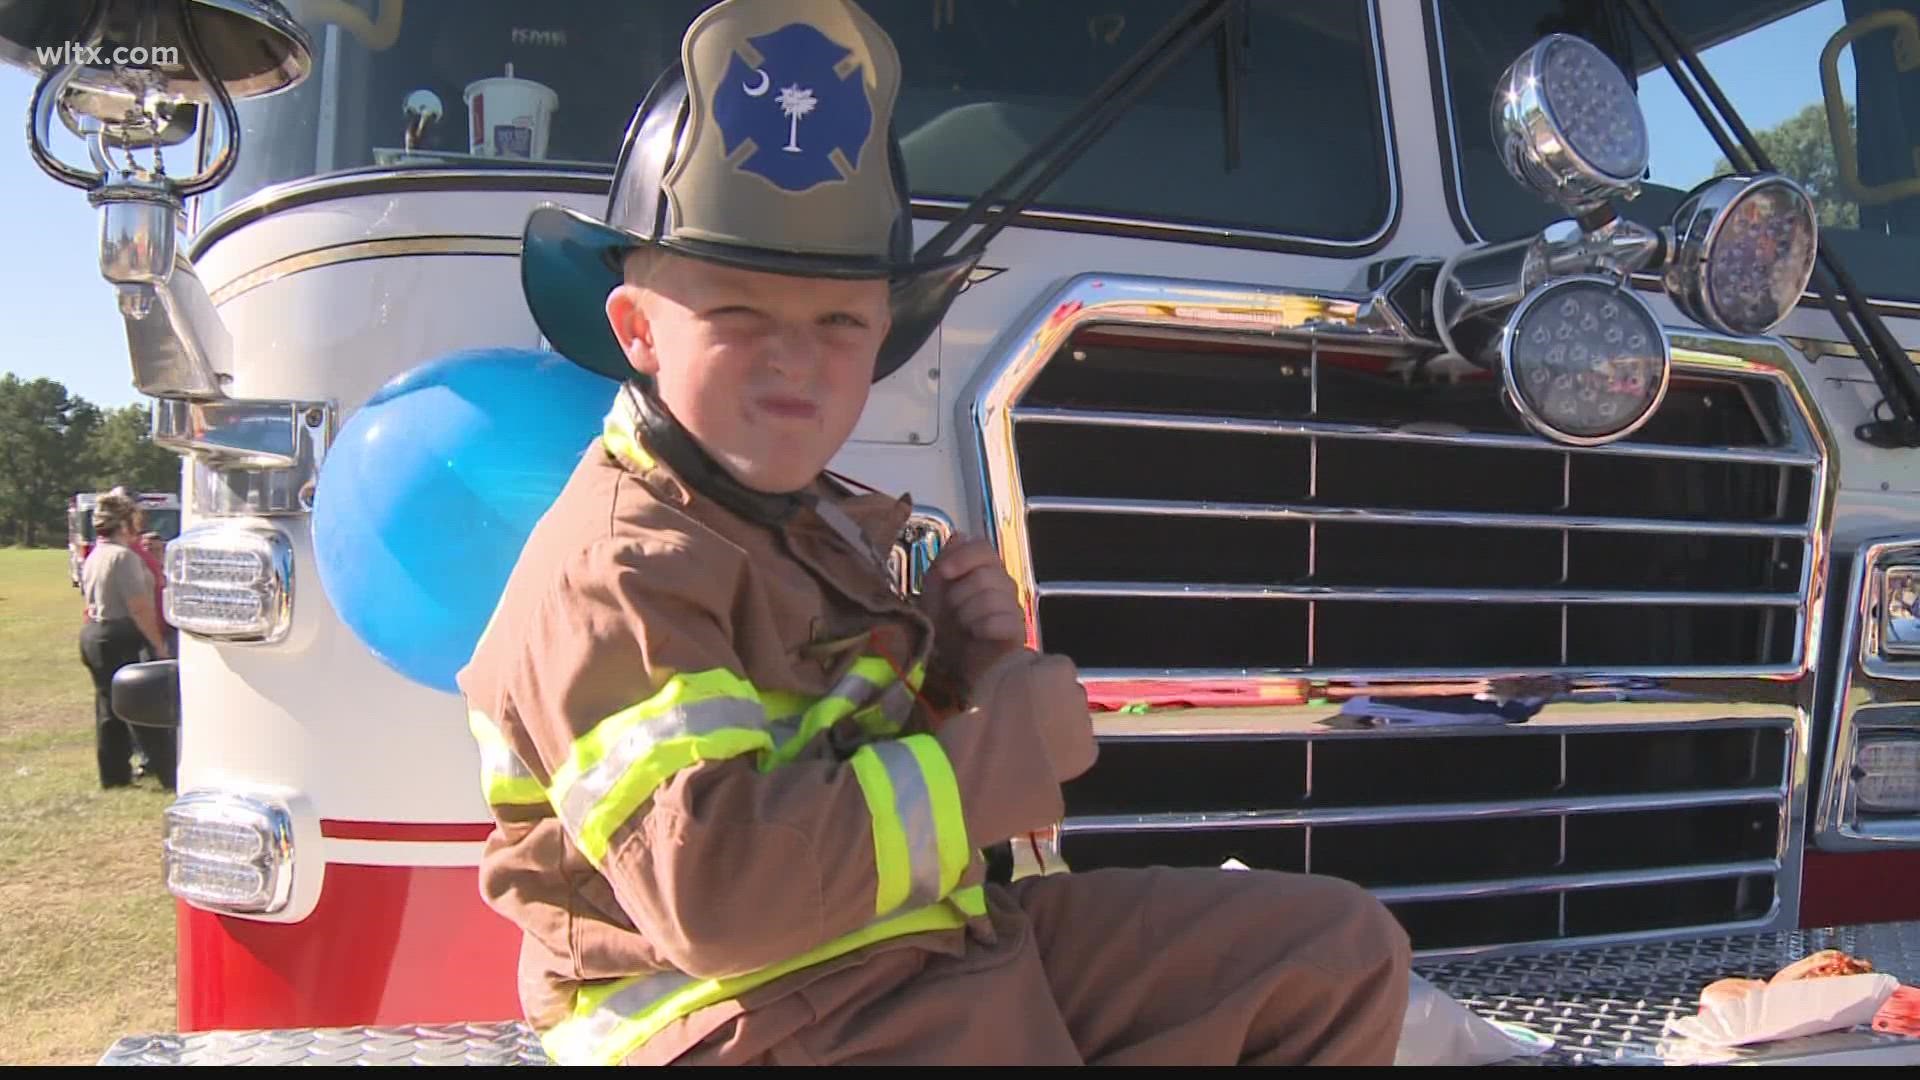 The event, which aims to educate the community about fire safety, begins with a parade downtown beginning at 9 am.